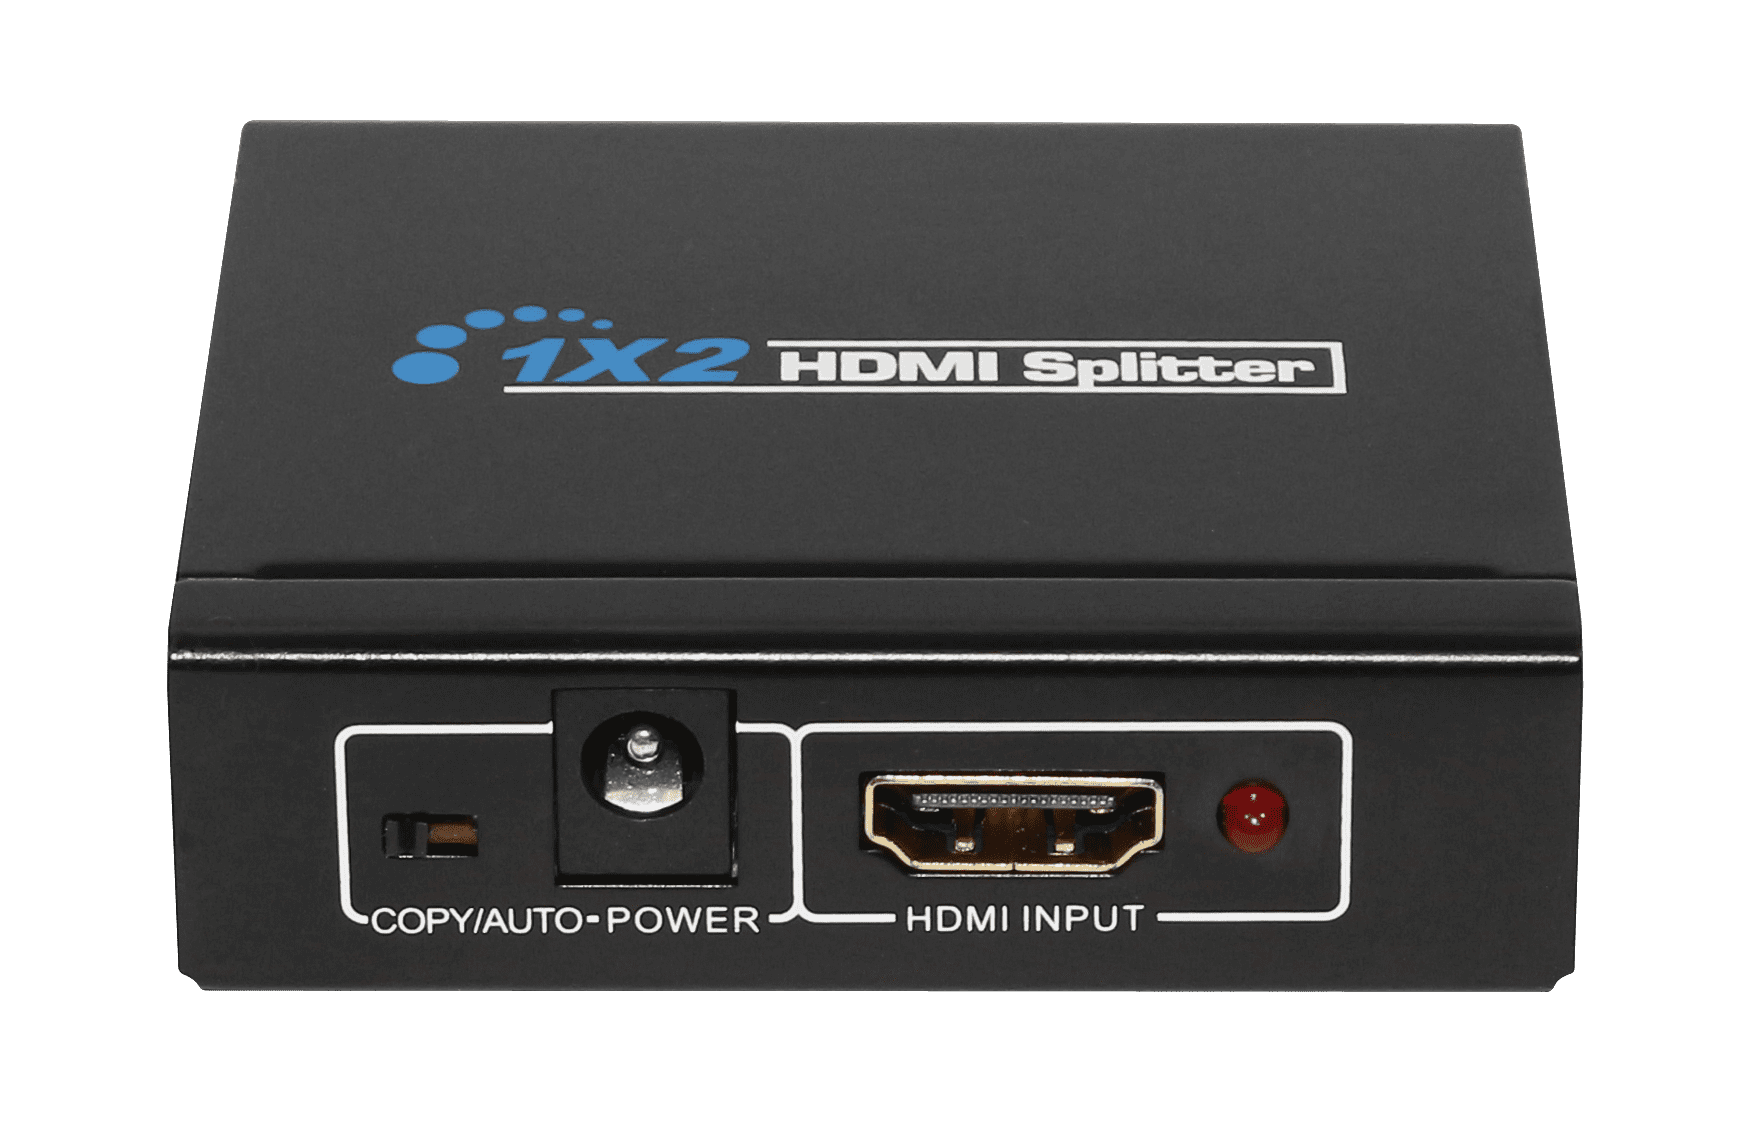 hdcvt-1x2-hdmi-1.4-splitter-supports-hdcp1.4-and-edid-1-image